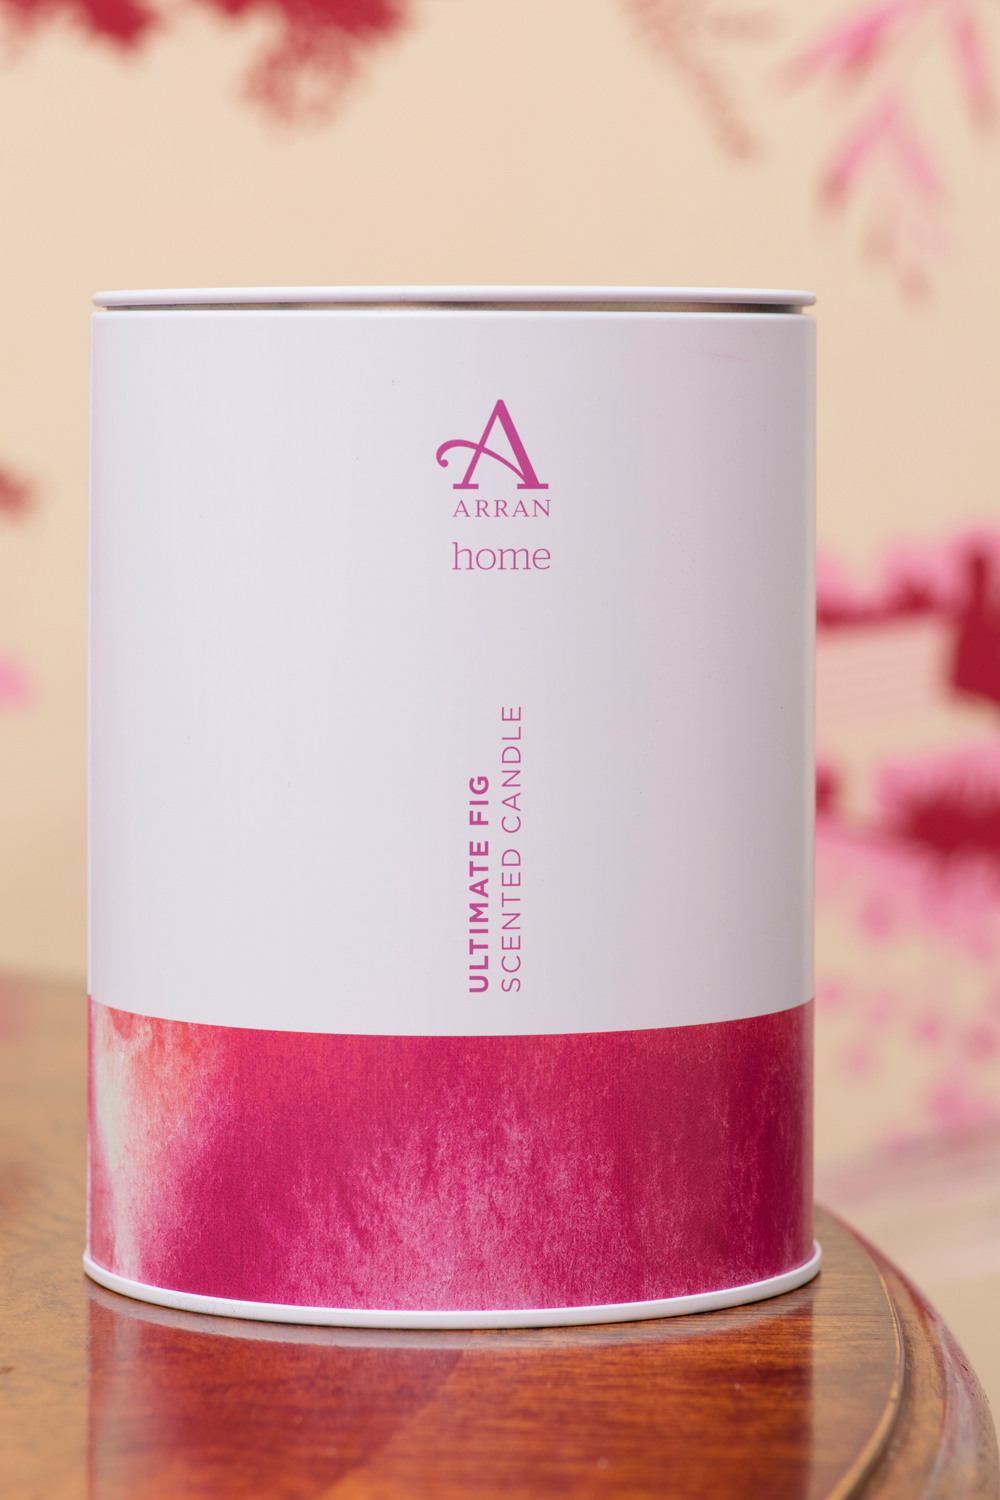 Arran candle in The Pink House/Photo: Susie Lowe